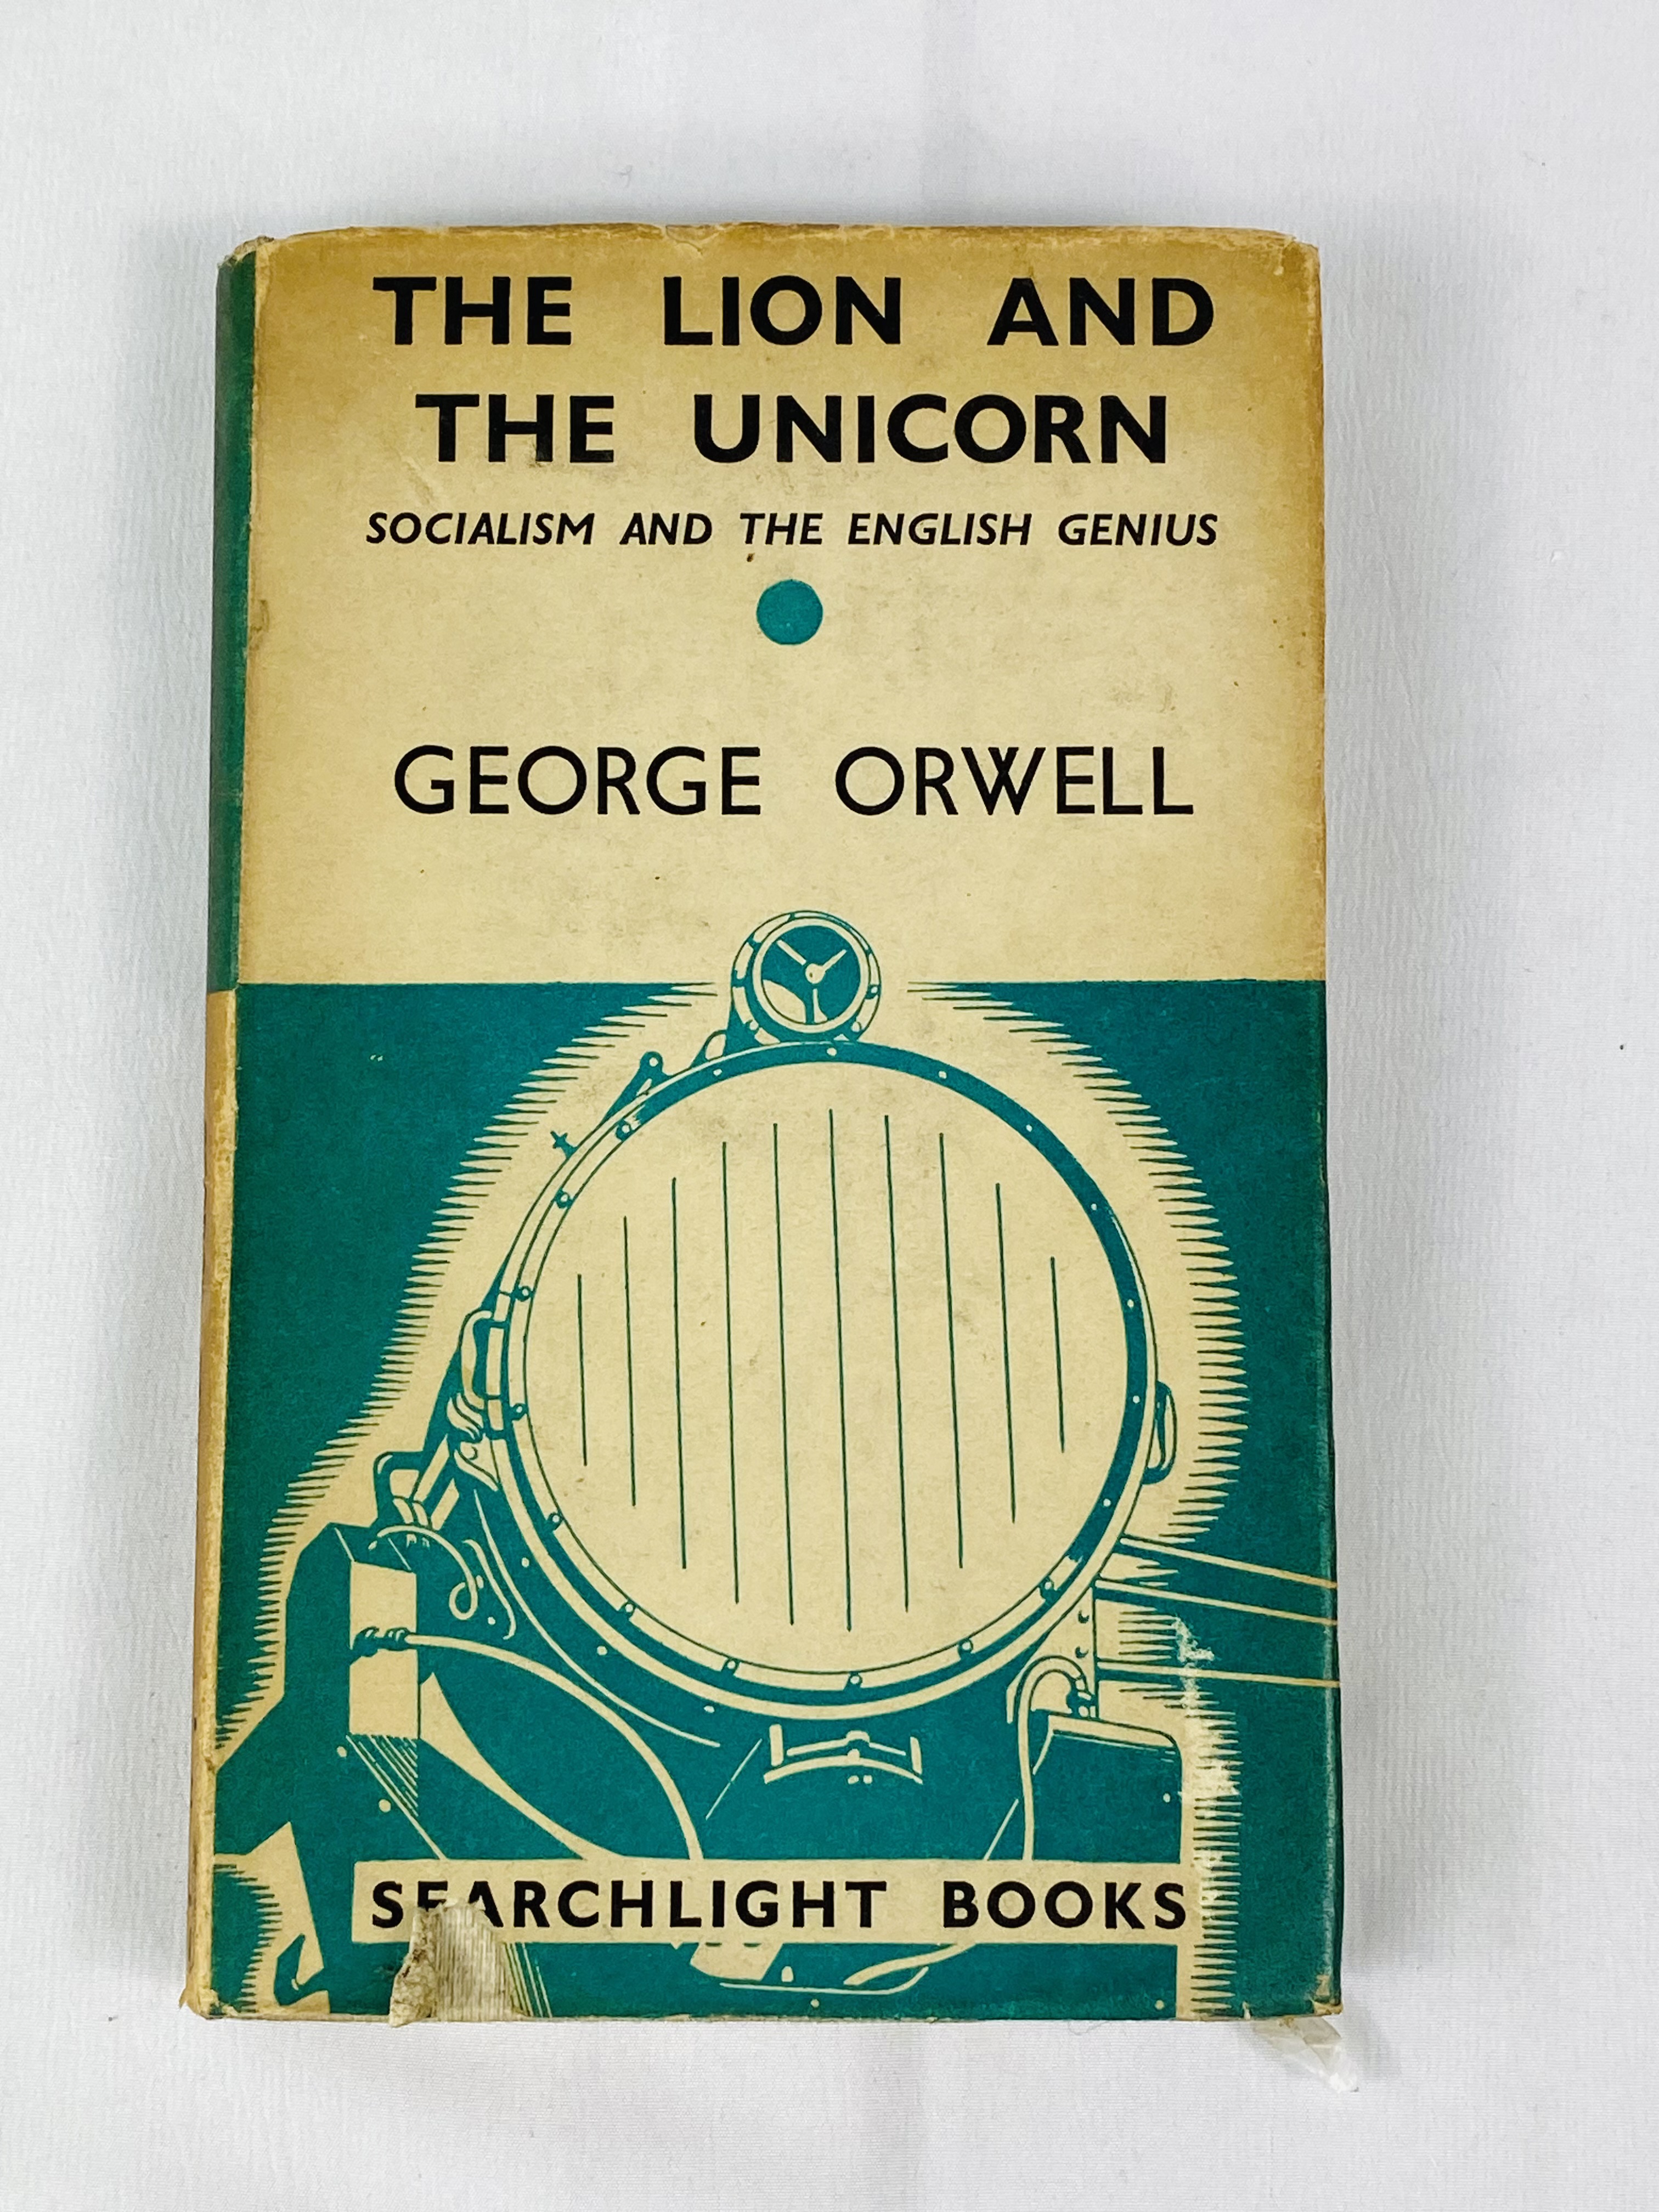 George Orwell, The Lion and the Unicorn, Searchlight Books No. 1, 1st edition